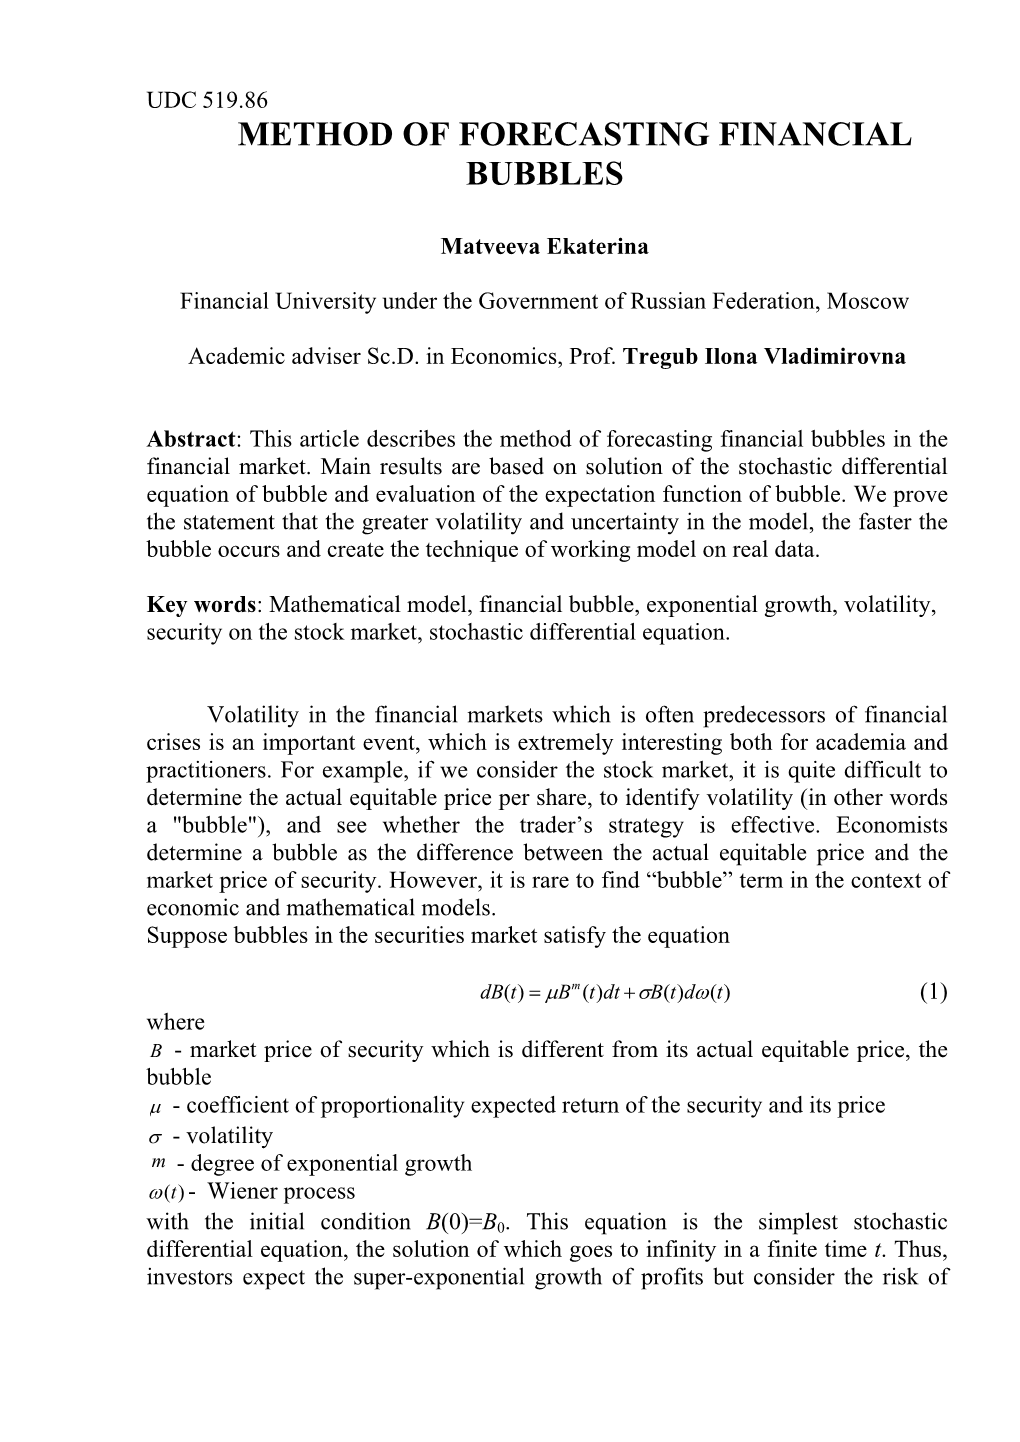 Method of Forecasting Financial Bubbles